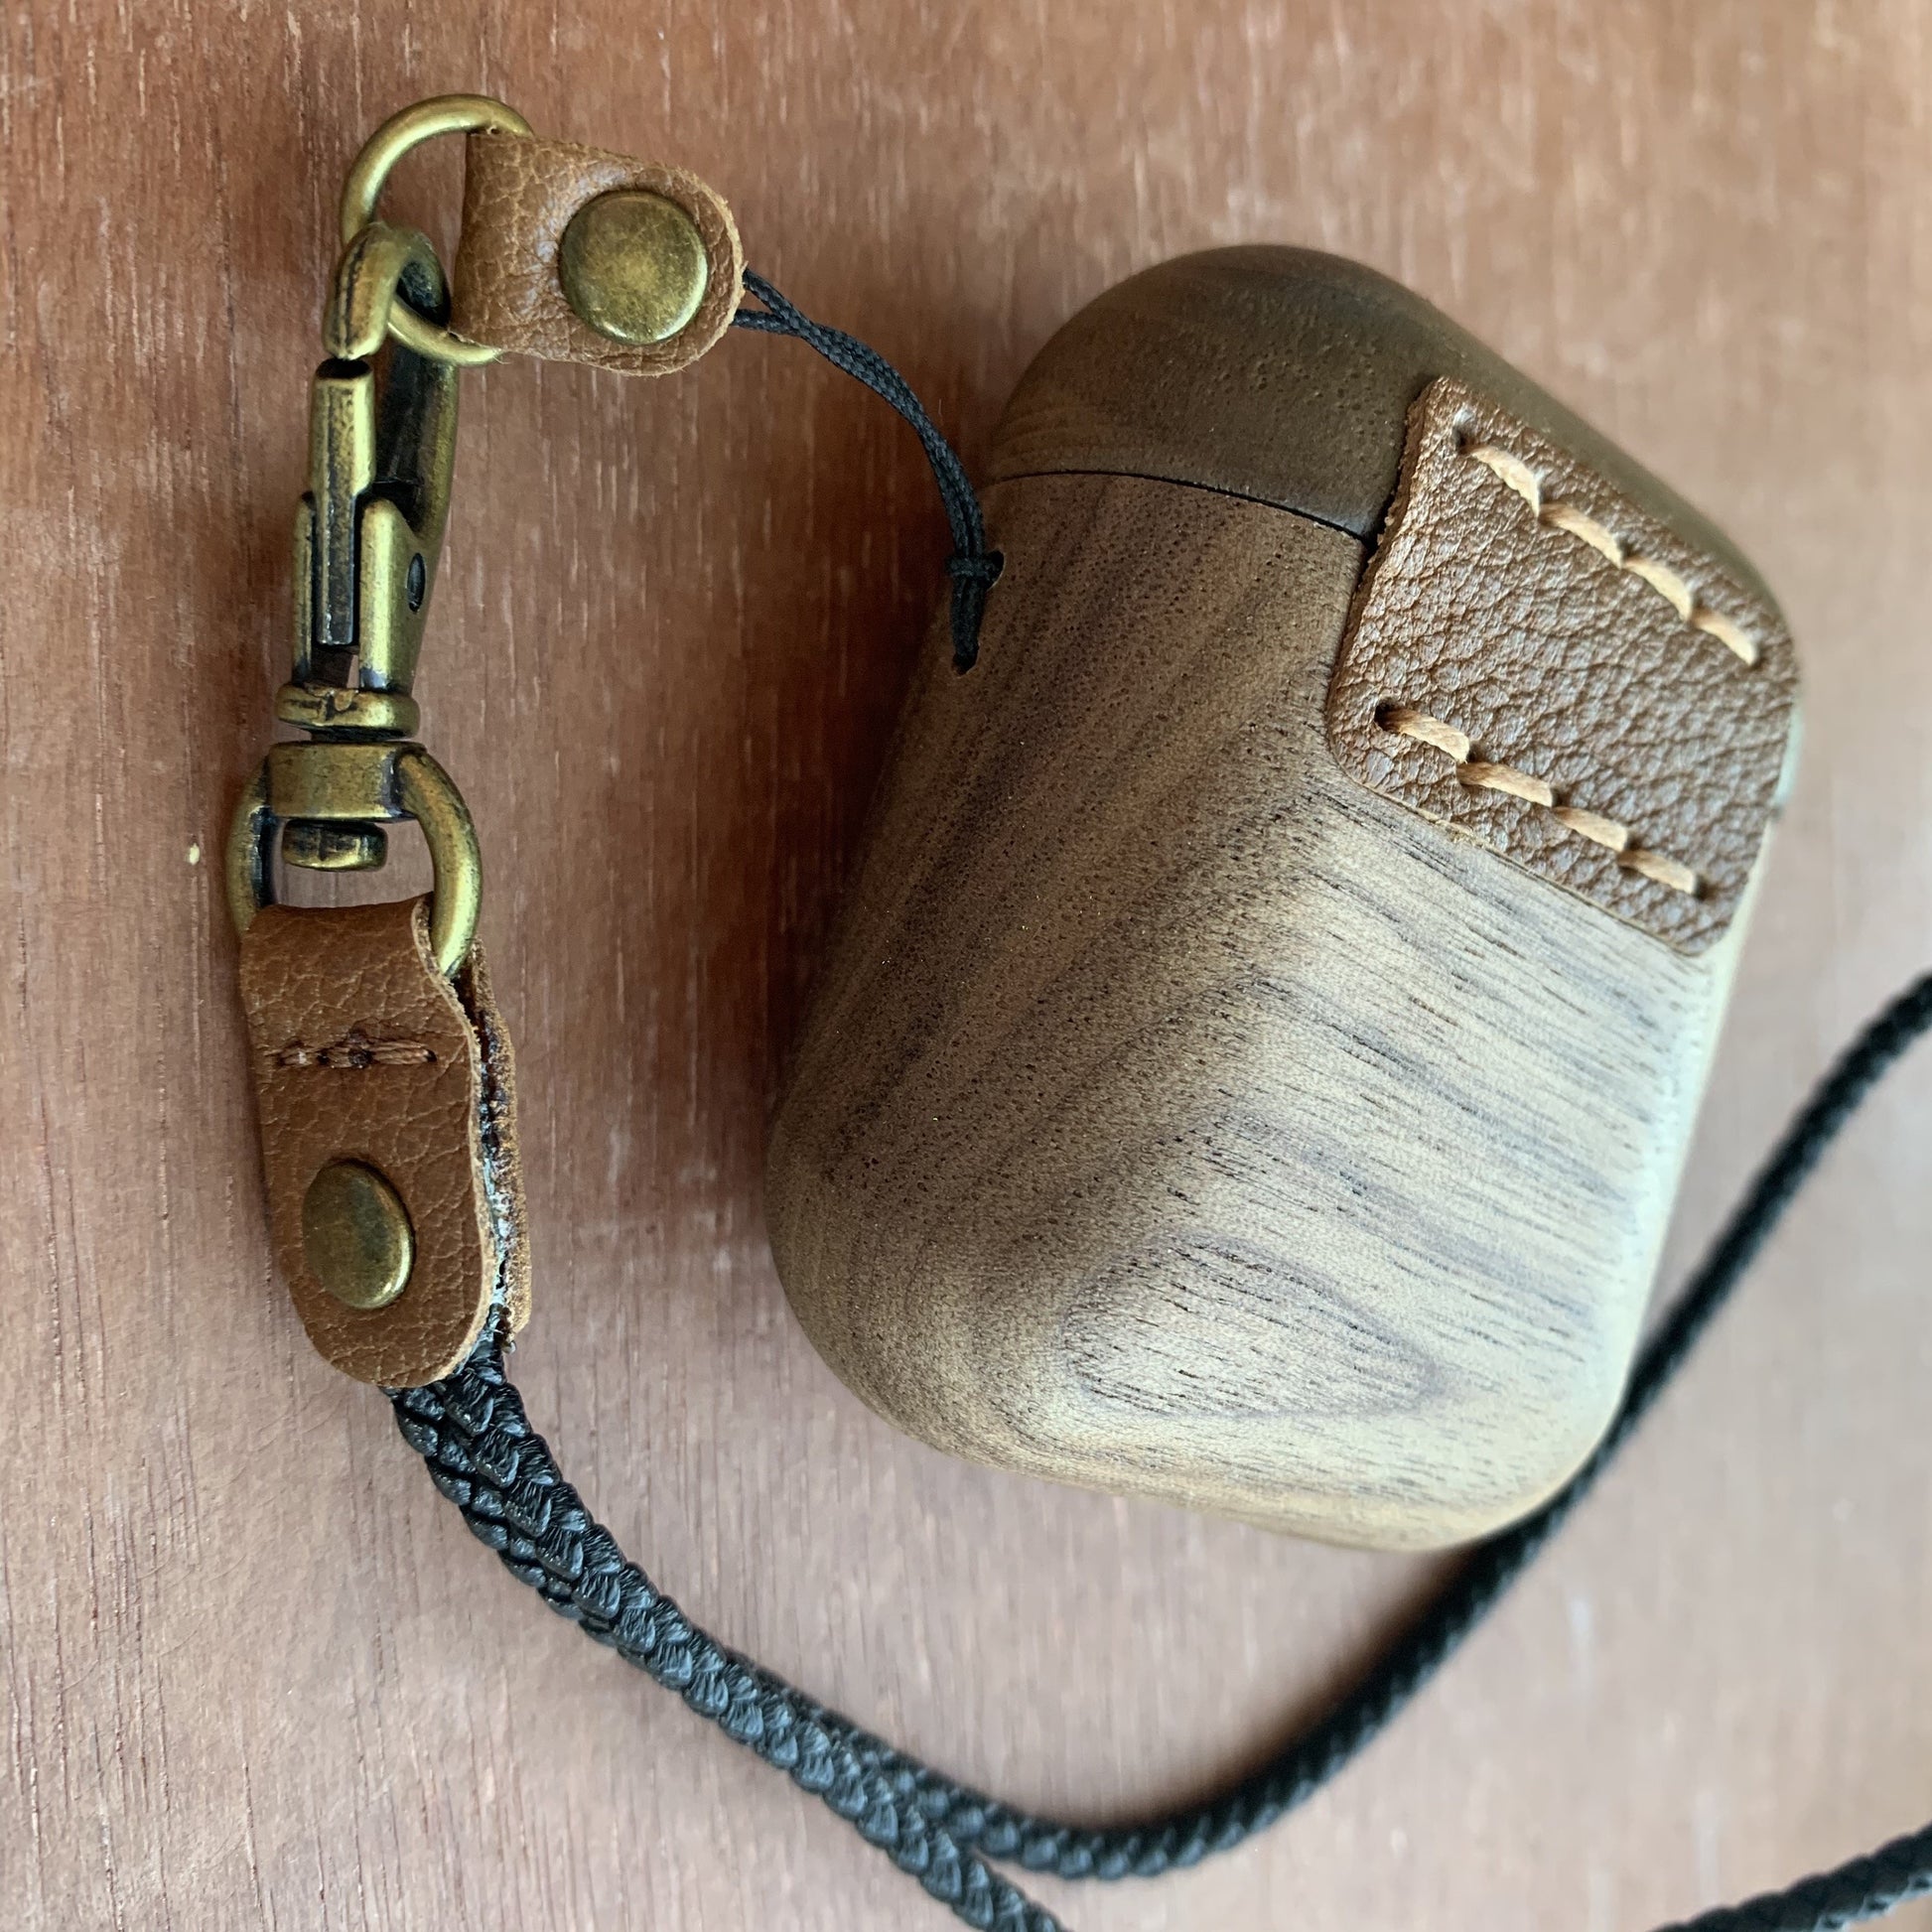 Walnut Wooden AirPod Case 🌳 Natural Wood. ♻️ Eco-friendly. ✈️ Free Worldwide Shipping. 🎁 Perfect Gift.